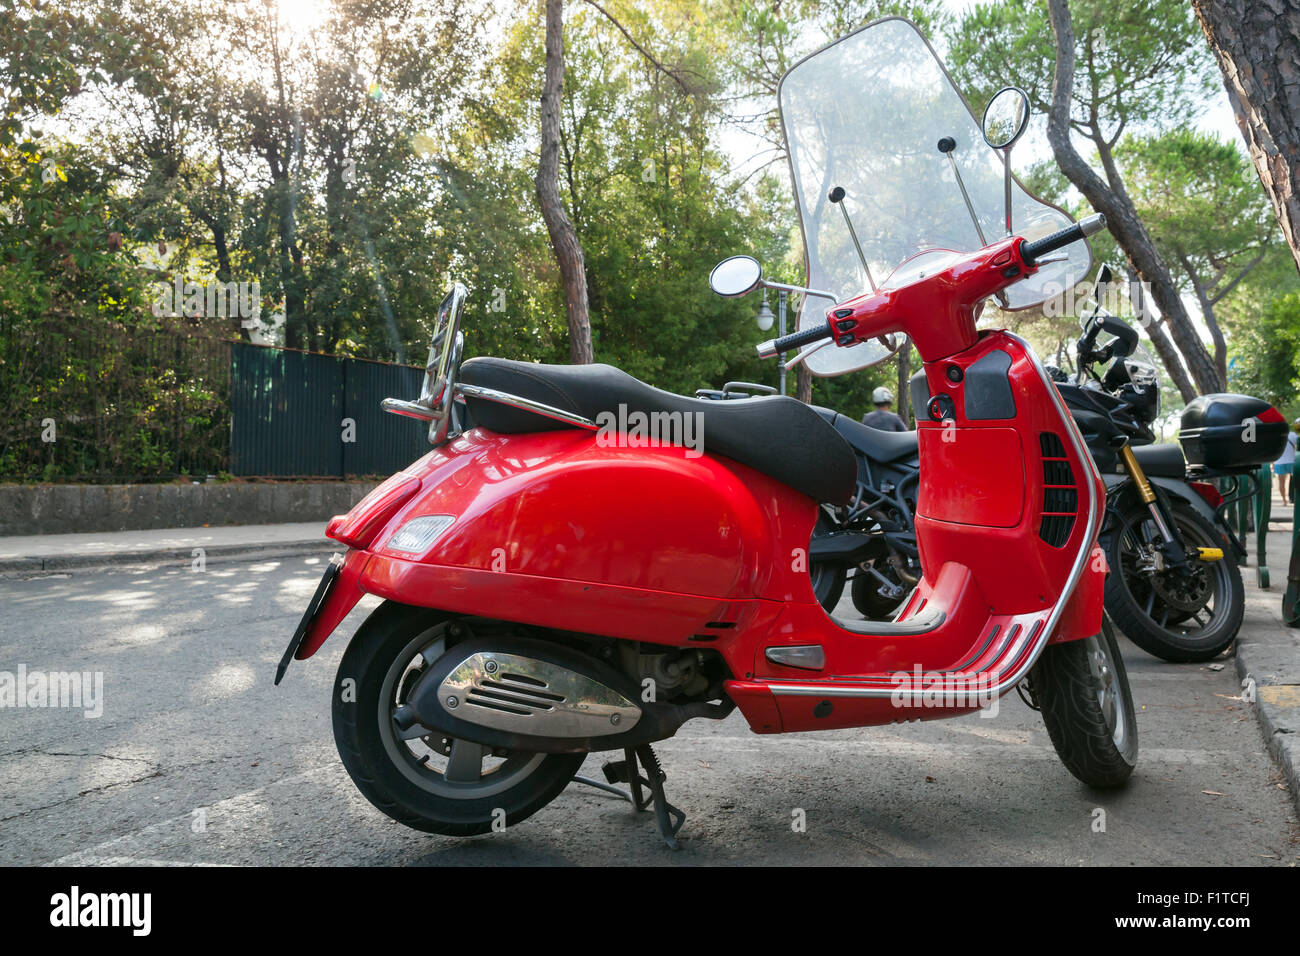 Ischia, Italy - August 15, 2015: Classic red old style Vespa scooter stands parked on a roadside Stock Photo